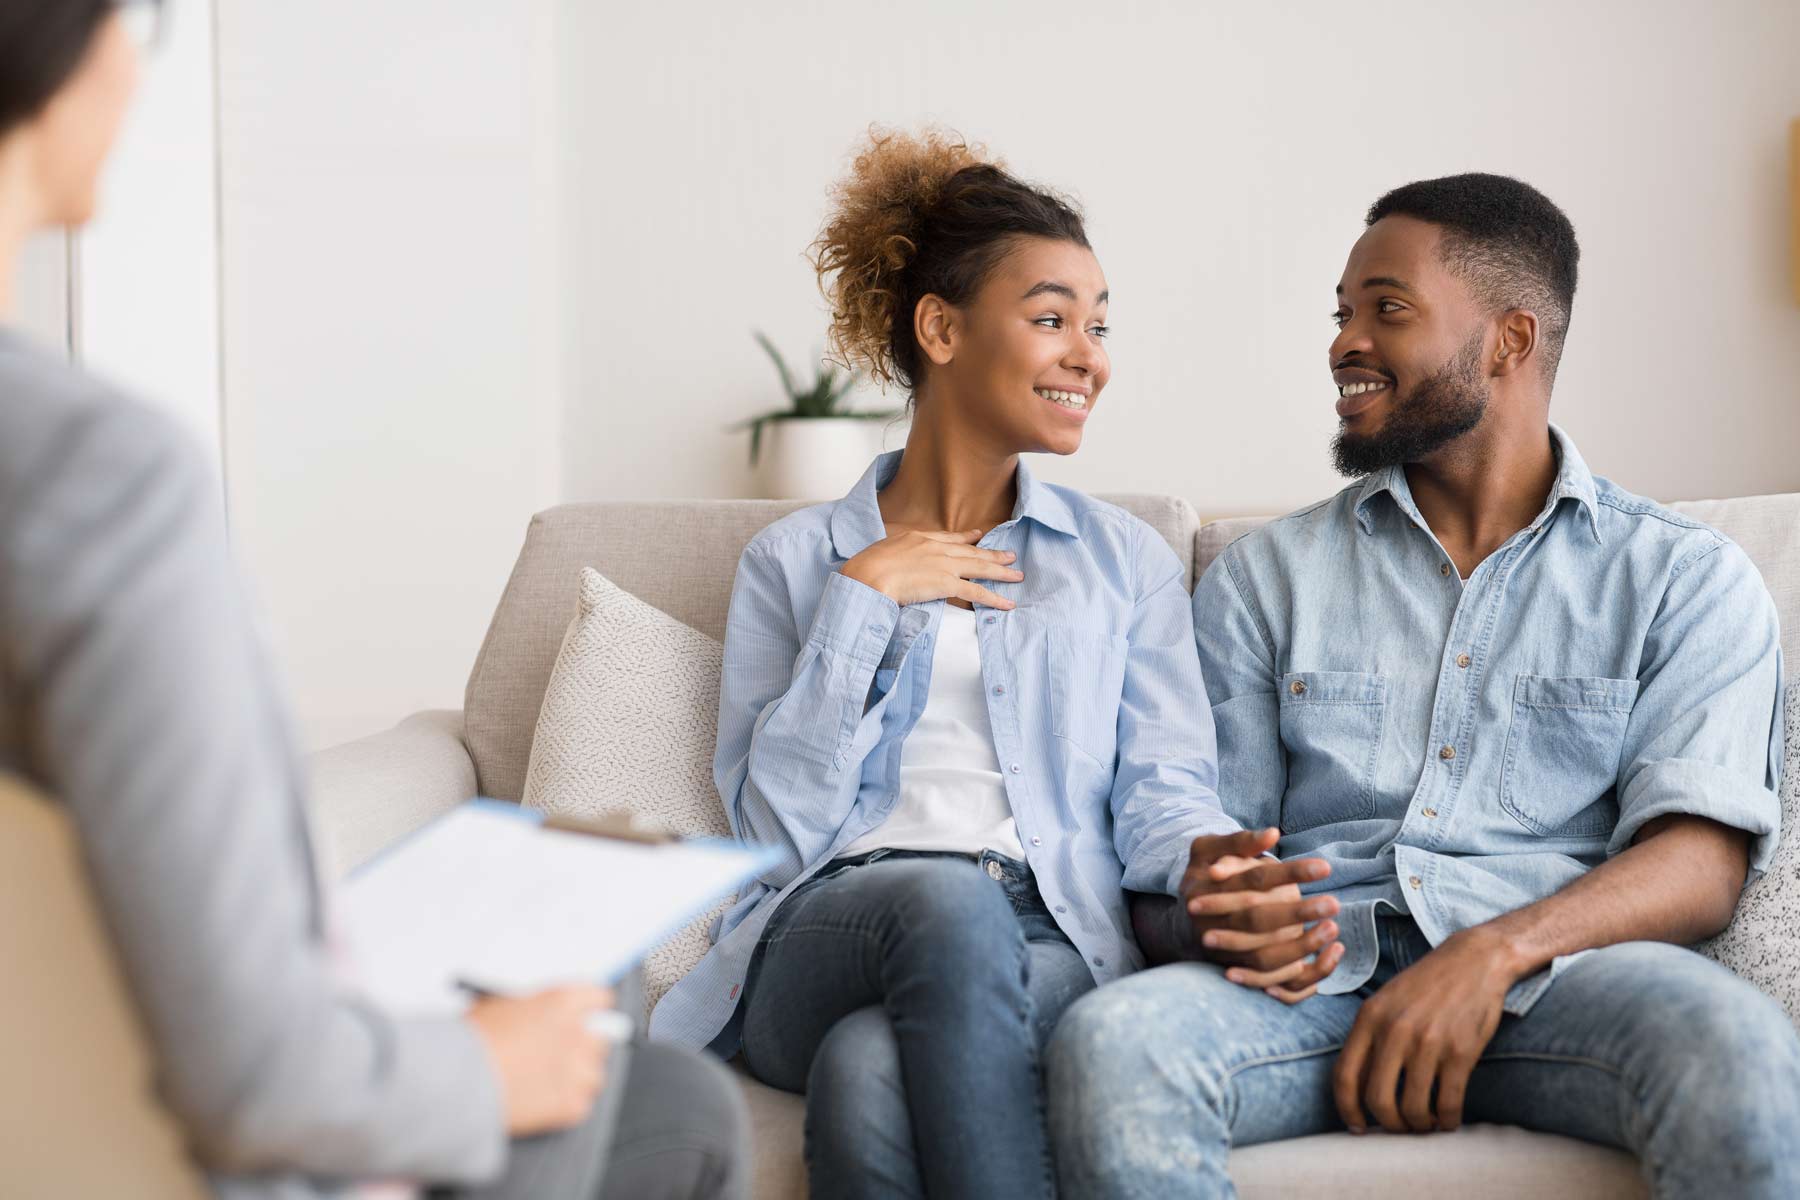 Marriage Counseling: What Is It And Does It Work?